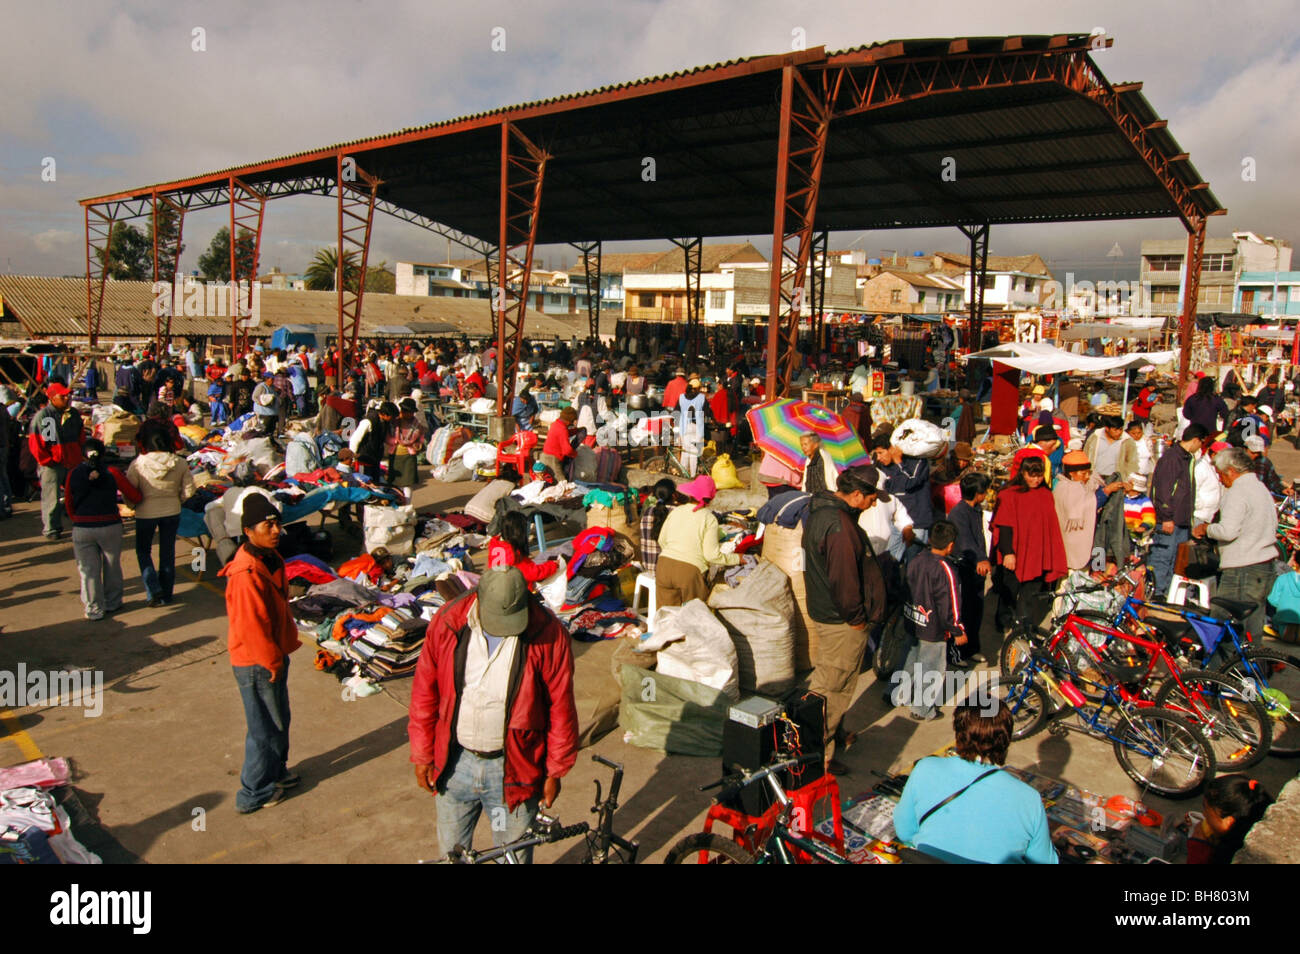 Ecuador, Saquisili, crowded market area with a roofed structure and buildings in the background, with people buying, window shop Stock Photo